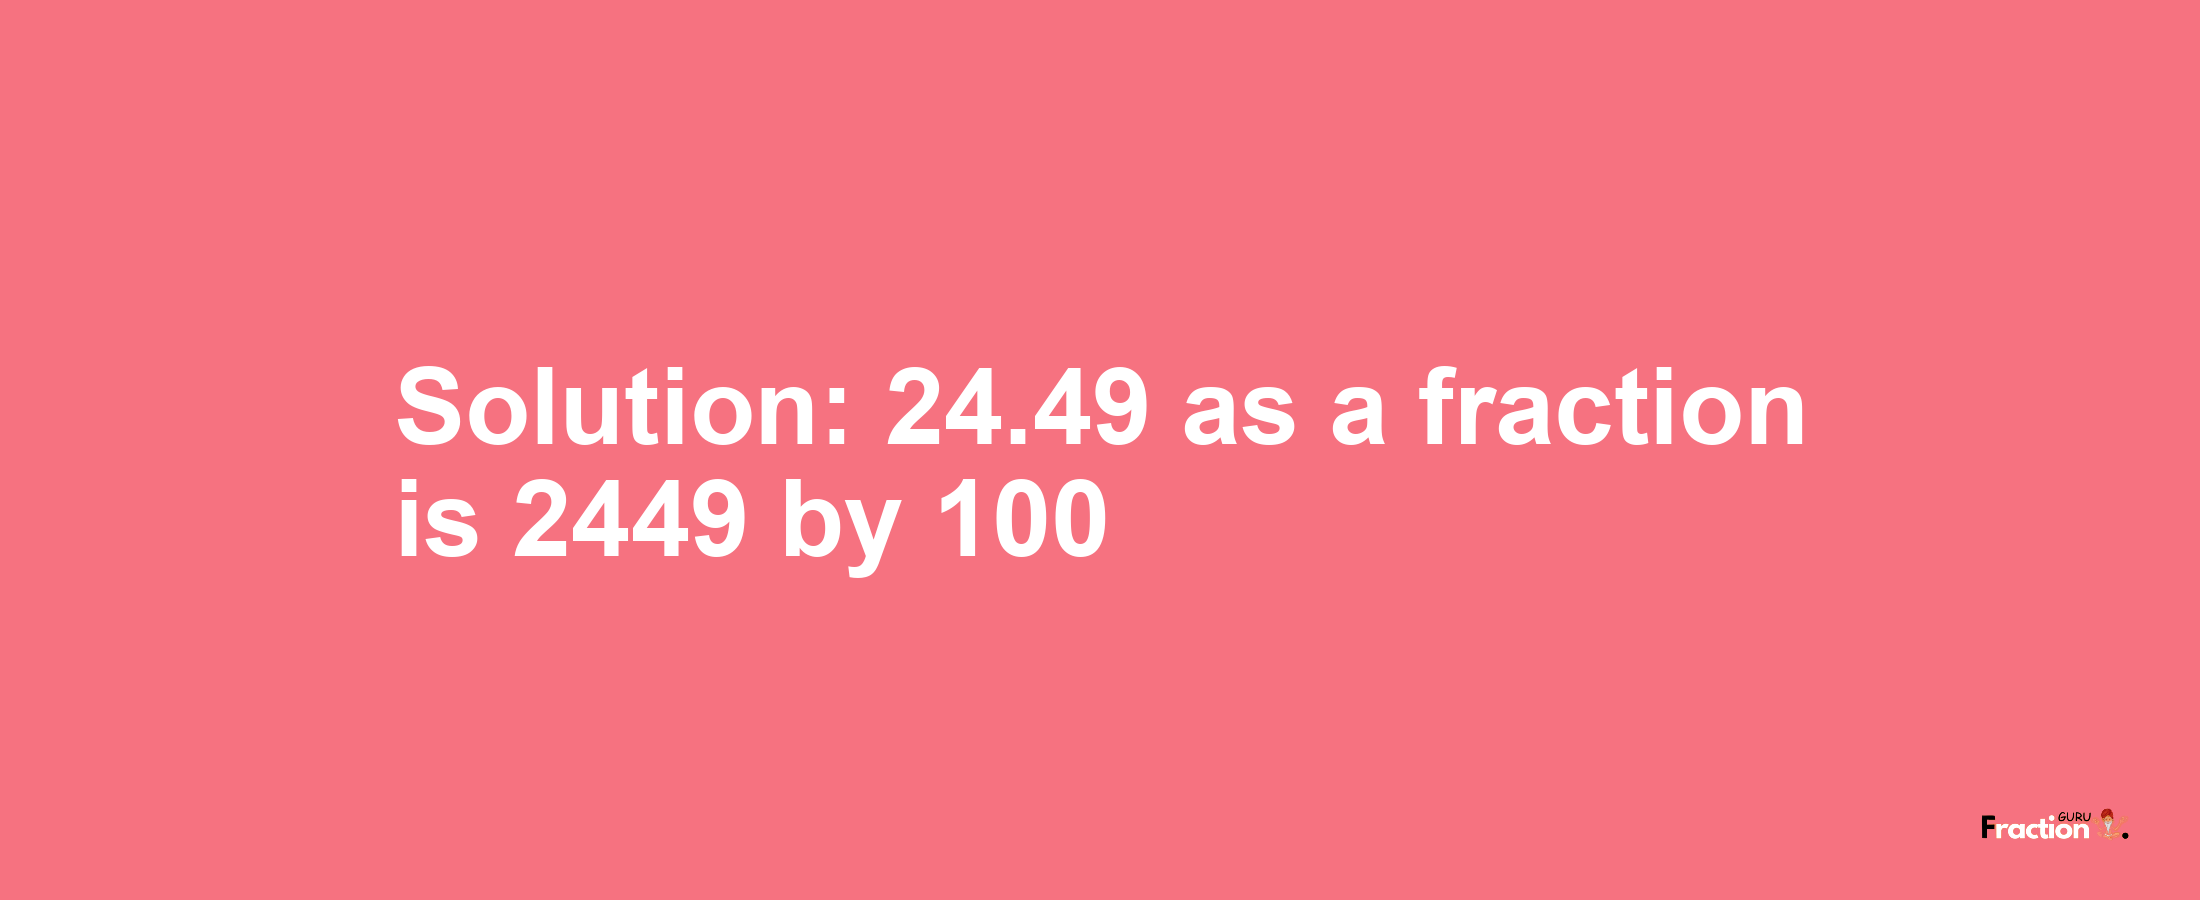 Solution:24.49 as a fraction is 2449/100